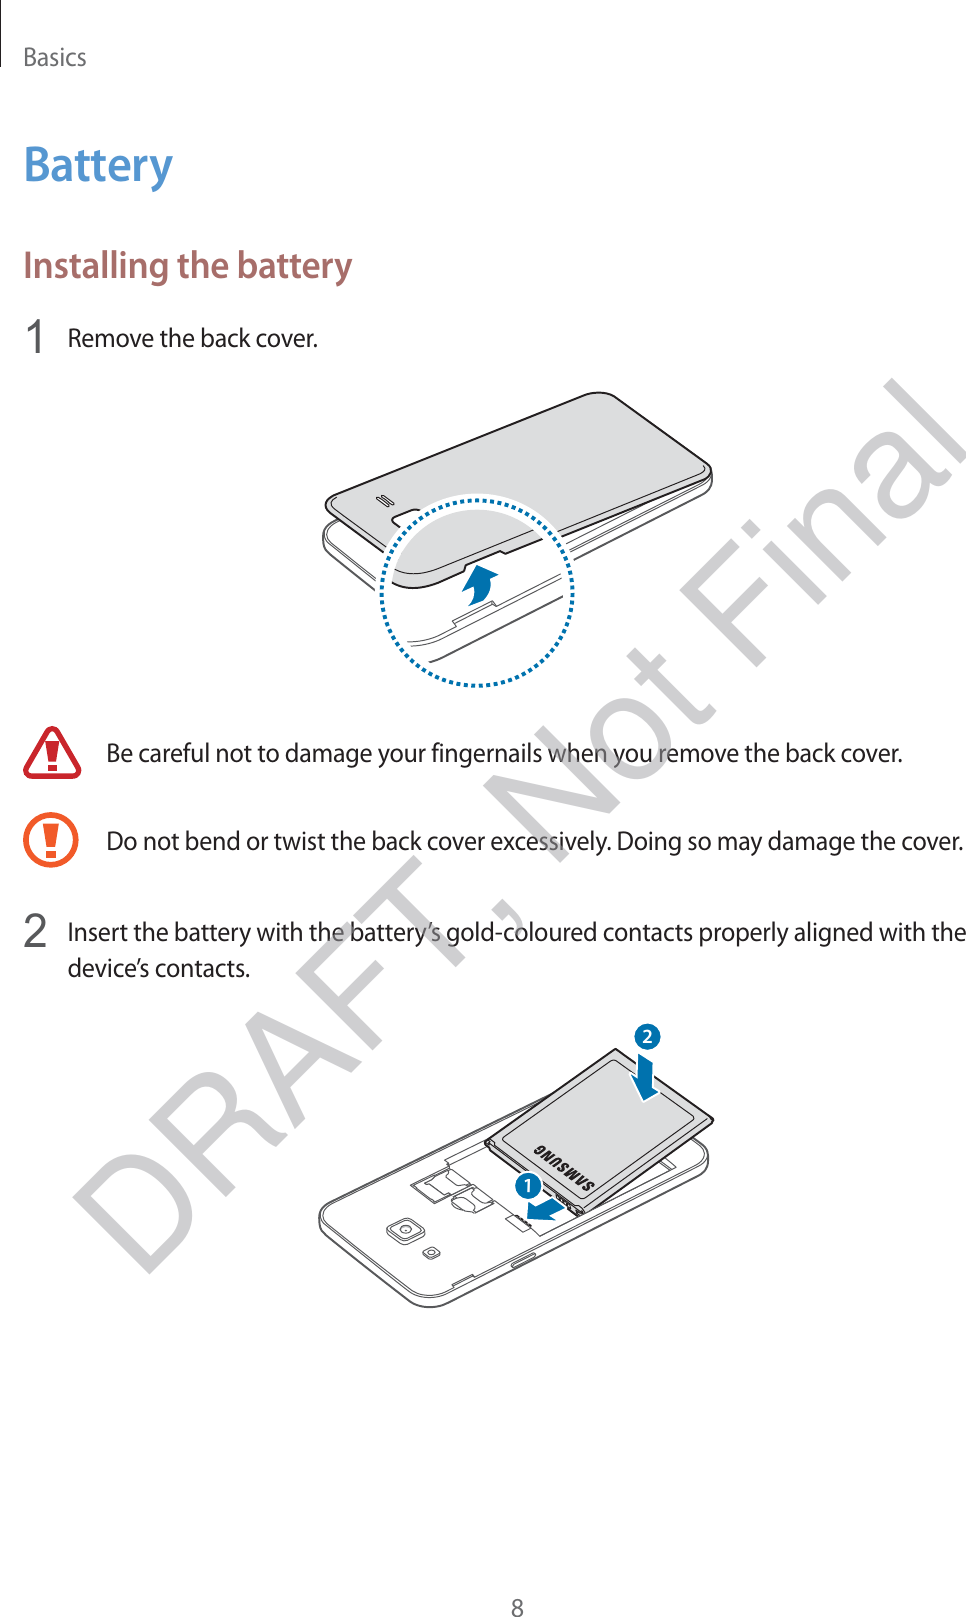 Basics8BatteryInstalling the battery1 Remove the back cover.Be careful not to damage your fingernails when you remove the back cover.Do not bend or twist the back cover excessively. Doing so may damage the cover.2 Insert the battery with the battery’s gold-coloured contacts properly aligned with the device’s contacts.12DRAFT, Not Final